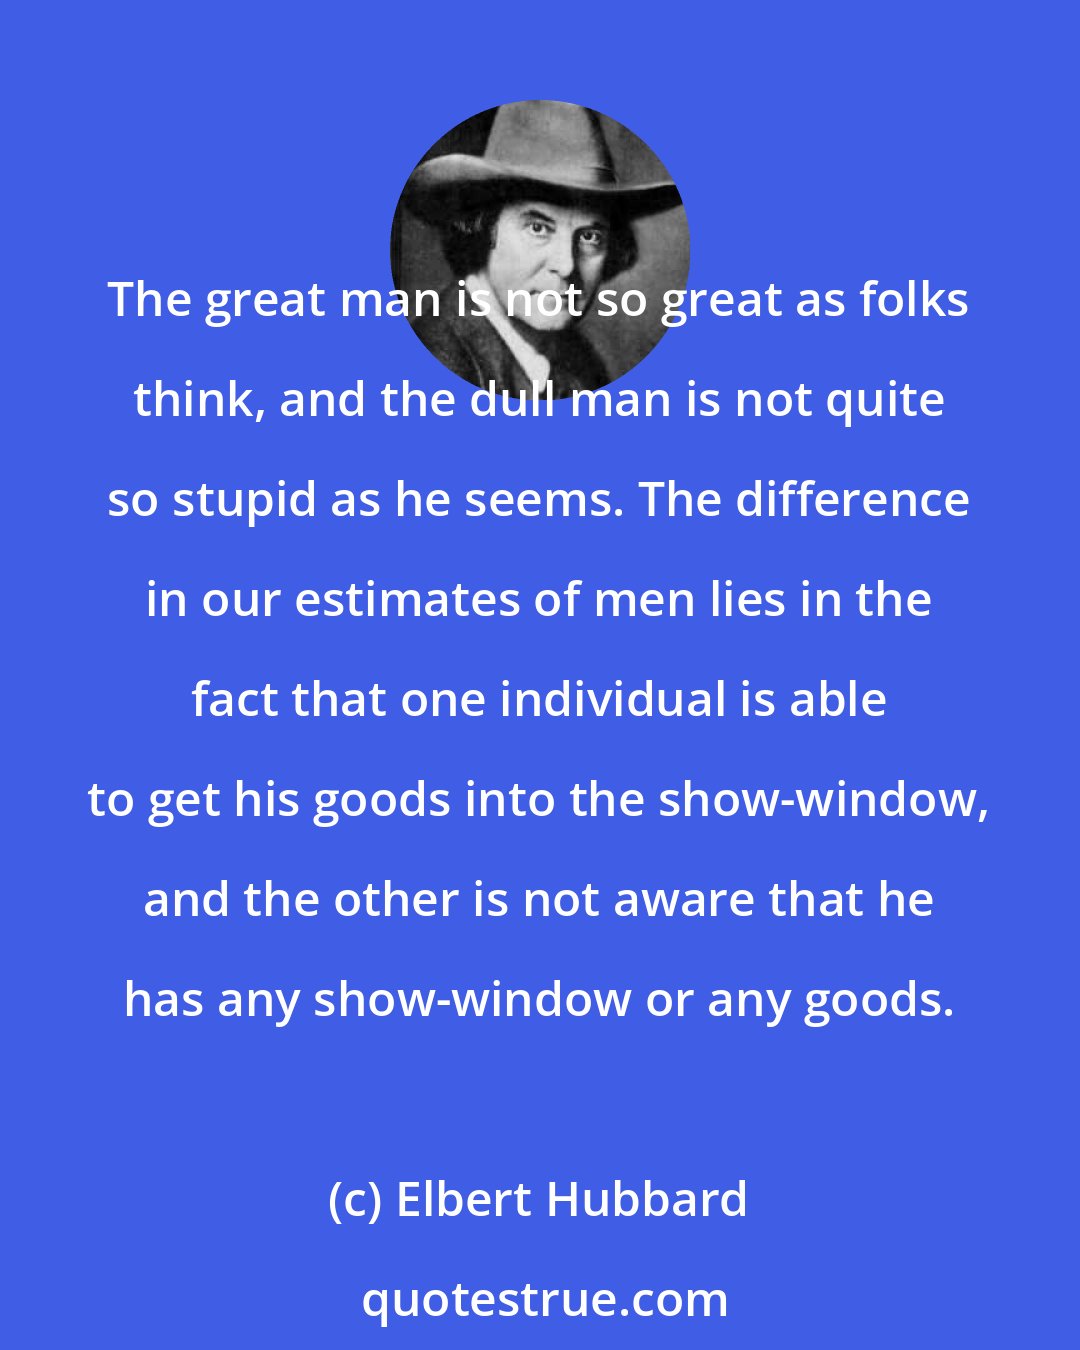 Elbert Hubbard: The great man is not so great as folks think, and the dull man is not quite so stupid as he seems. The difference in our estimates of men lies in the fact that one individual is able to get his goods into the show-window, and the other is not aware that he has any show-window or any goods.